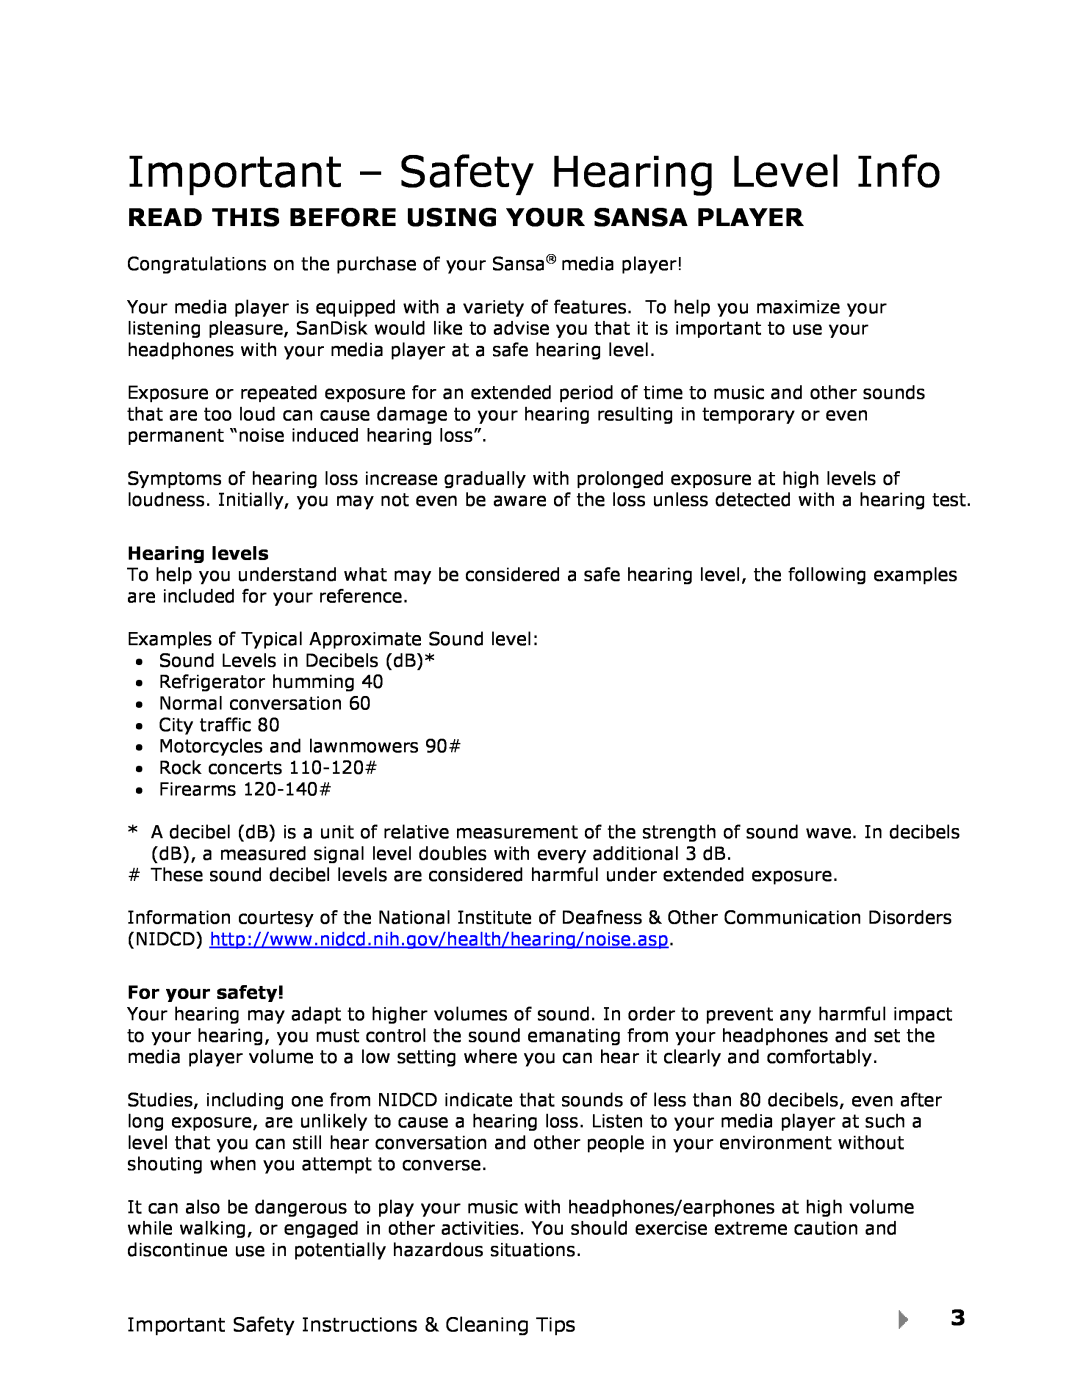 SanDisk View user manual Important - Safety Hearing Level Info, Read This Before Using Your Sansa Player, Hearing levels 